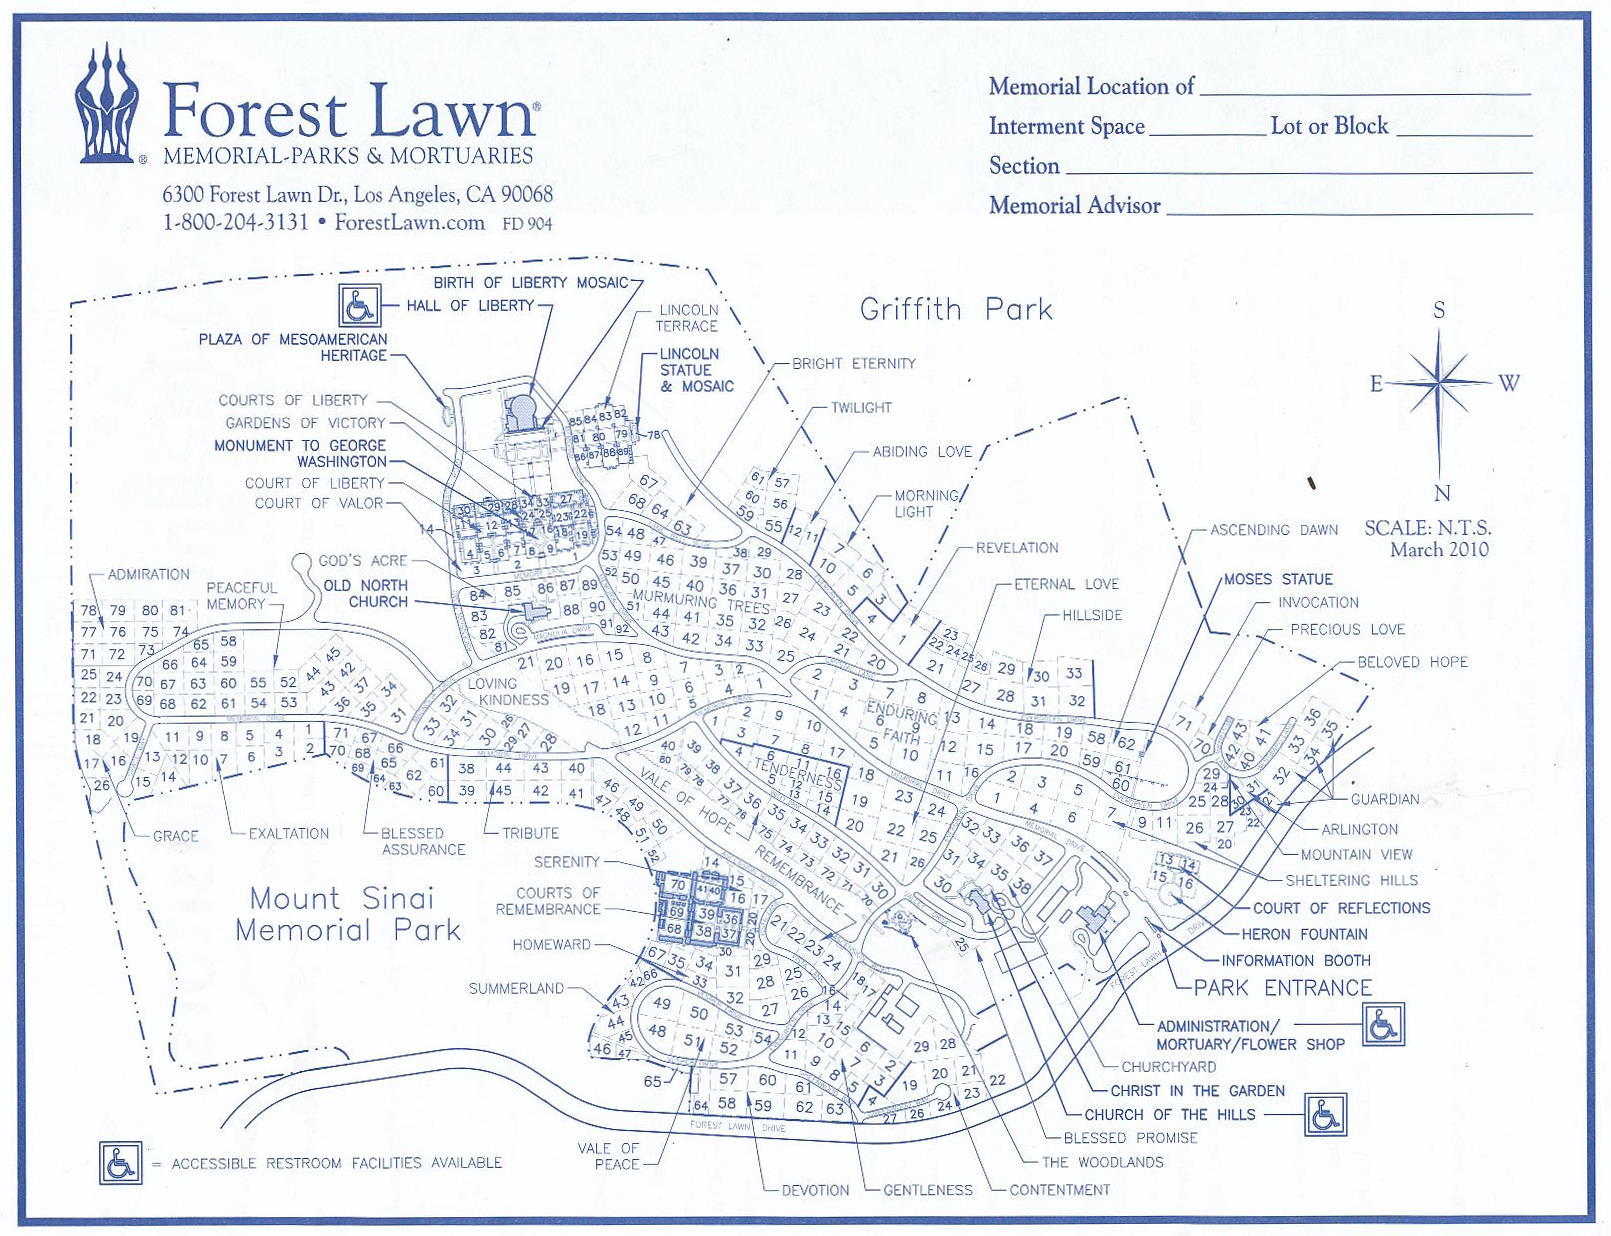 Cemetery map of Forest Lawn Memorial Park - Hollywood Hills in Los Angeles, California.